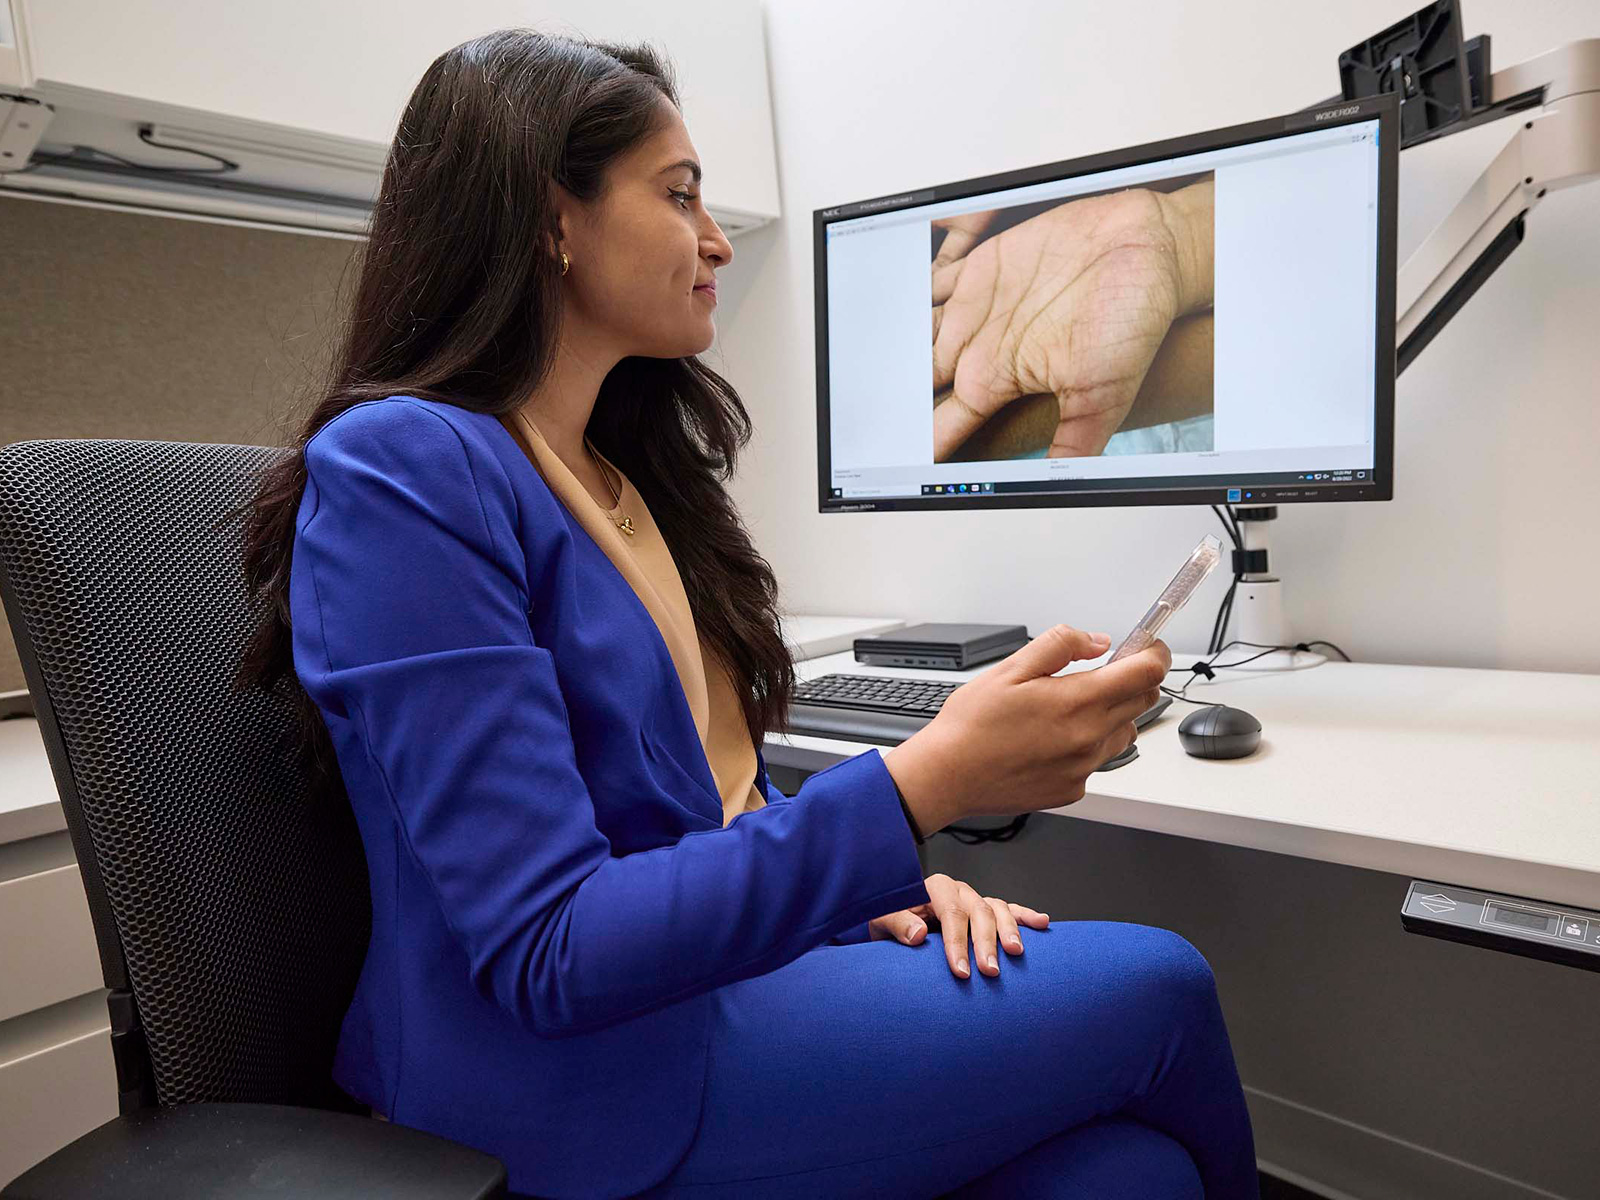 Physician reviewing an e-consult provided photo on a computer